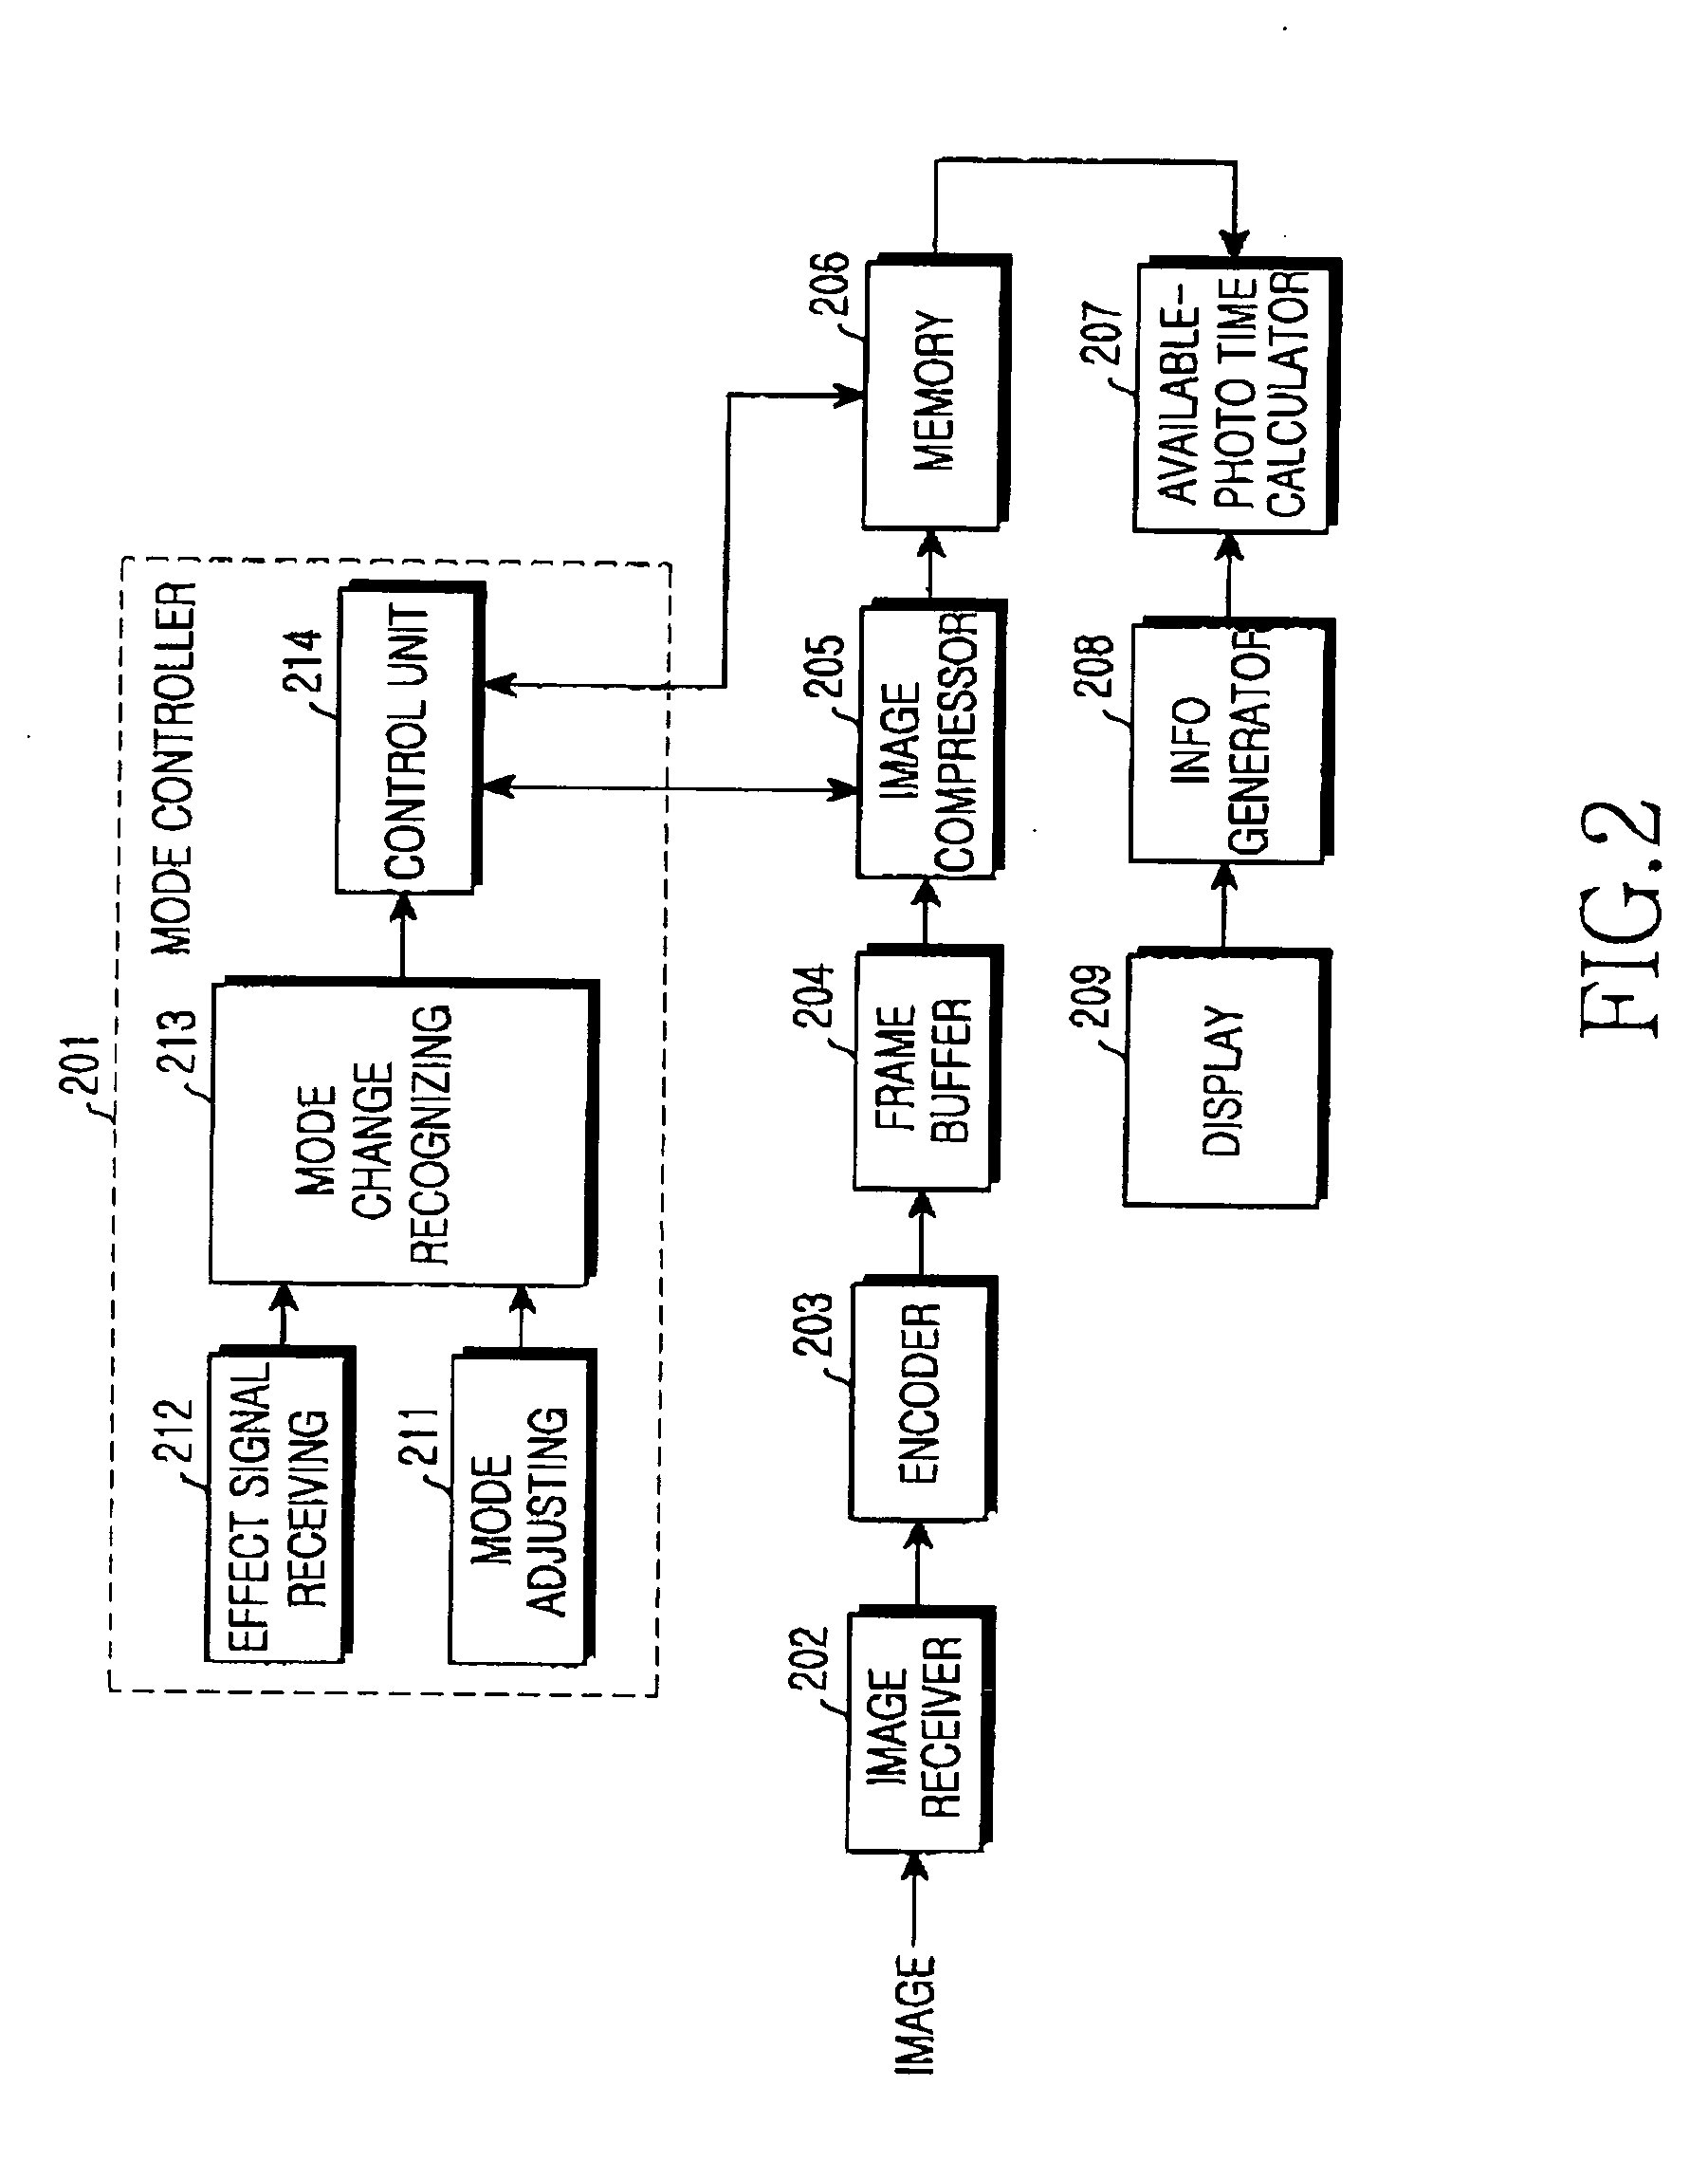 Apparatus and method for changing image quality in real time in a digital camcorder